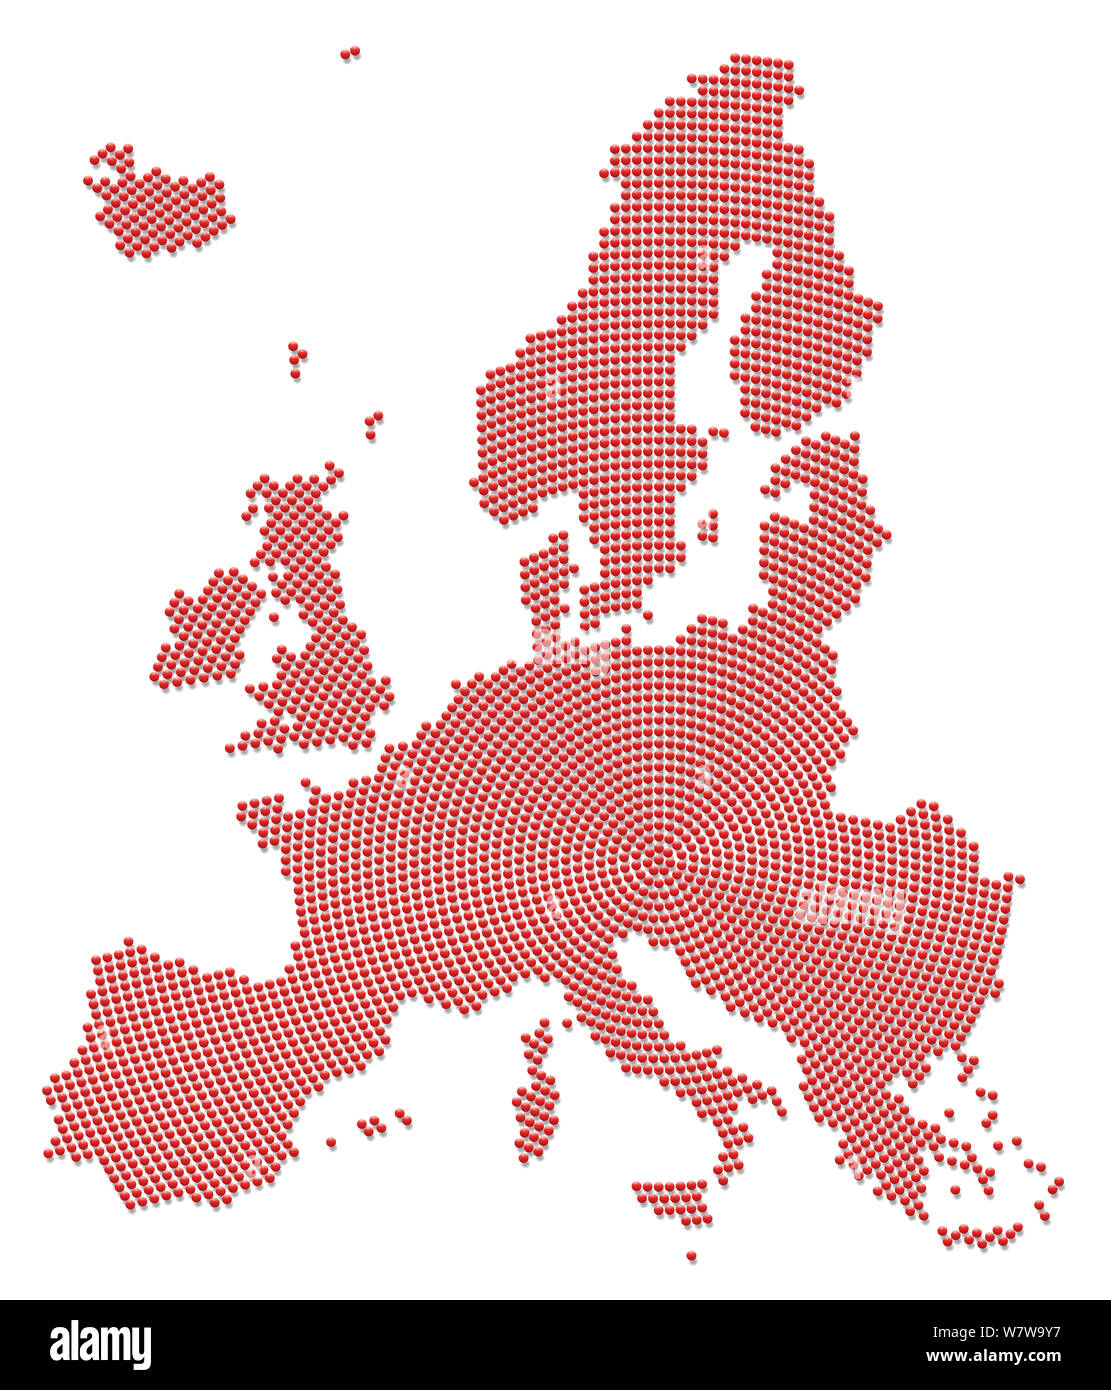 Europe map with many little red balls - illustration, radial pattern on white background. Stock Photo